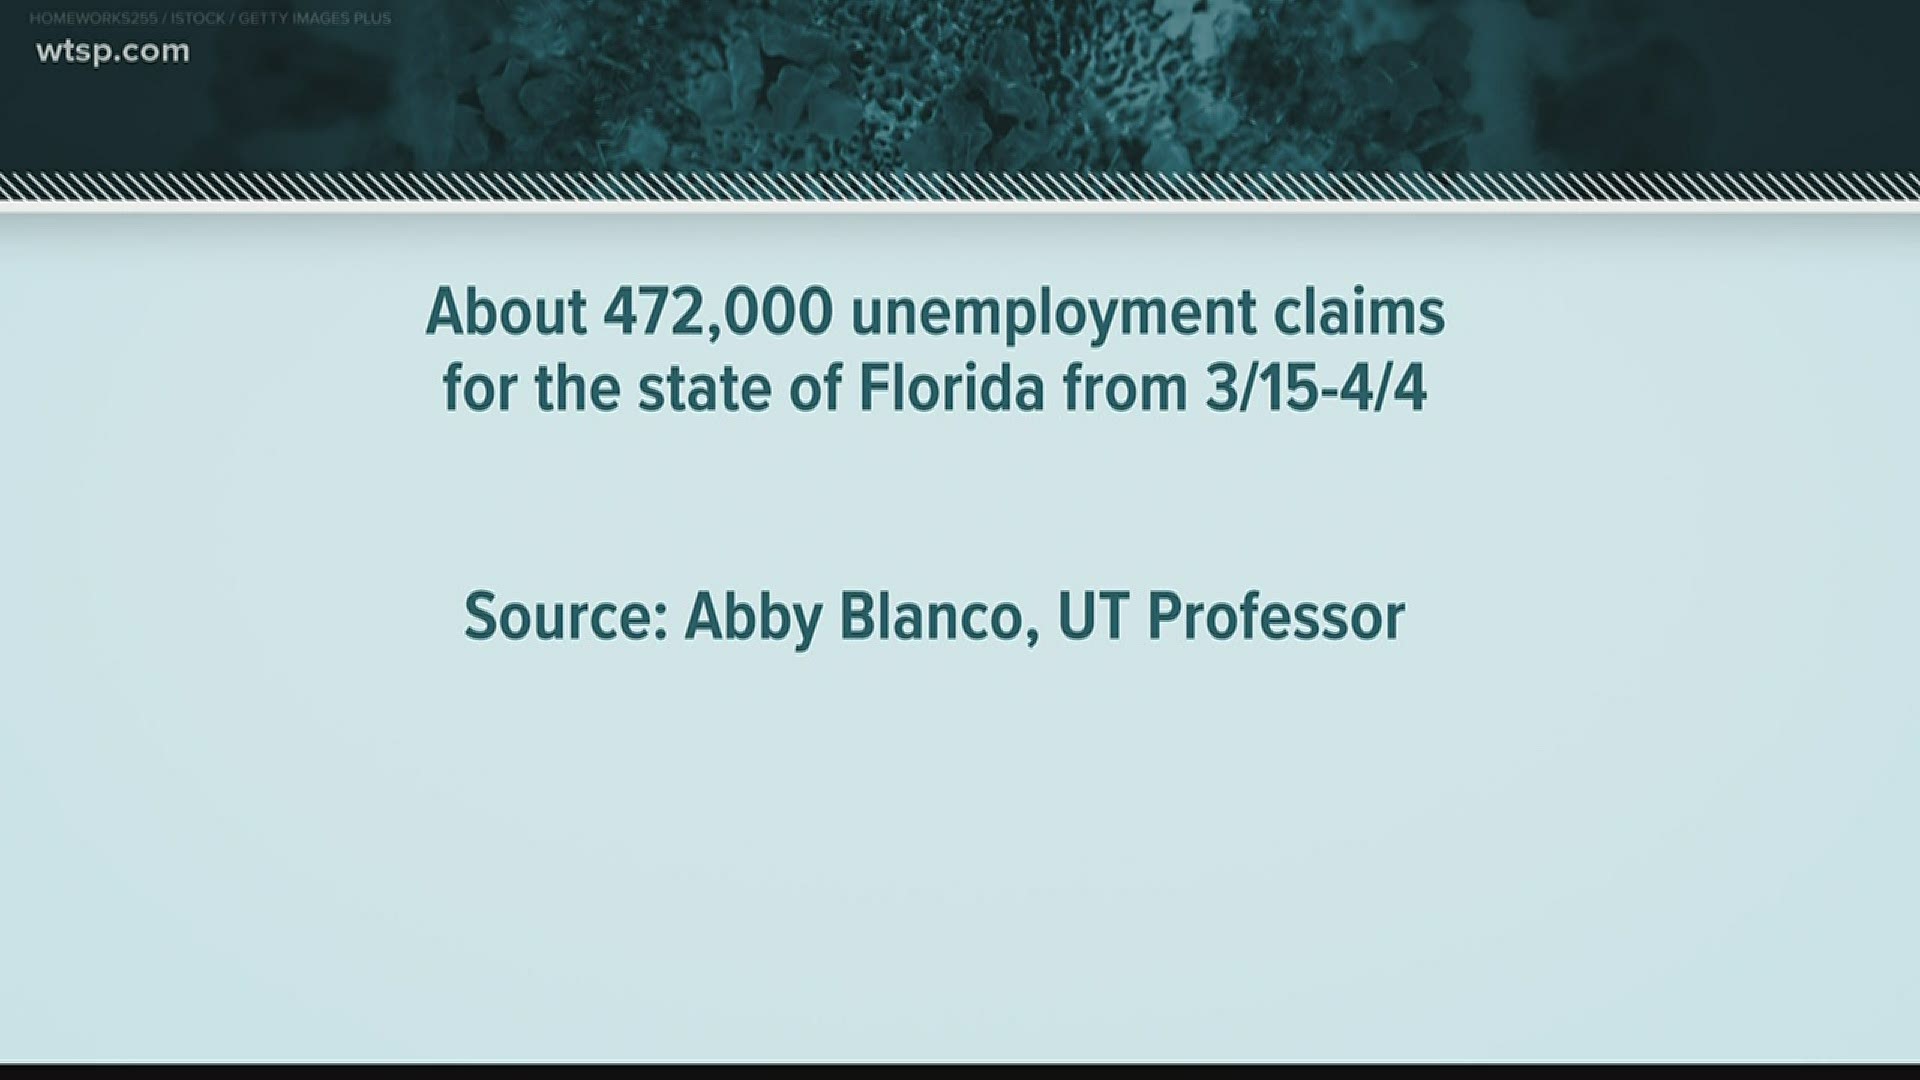 Dr. Abby Blanco, an assistant professor of economics at the University of Tampa thinks Florida's economy will eventually bounce back post-pandemic.